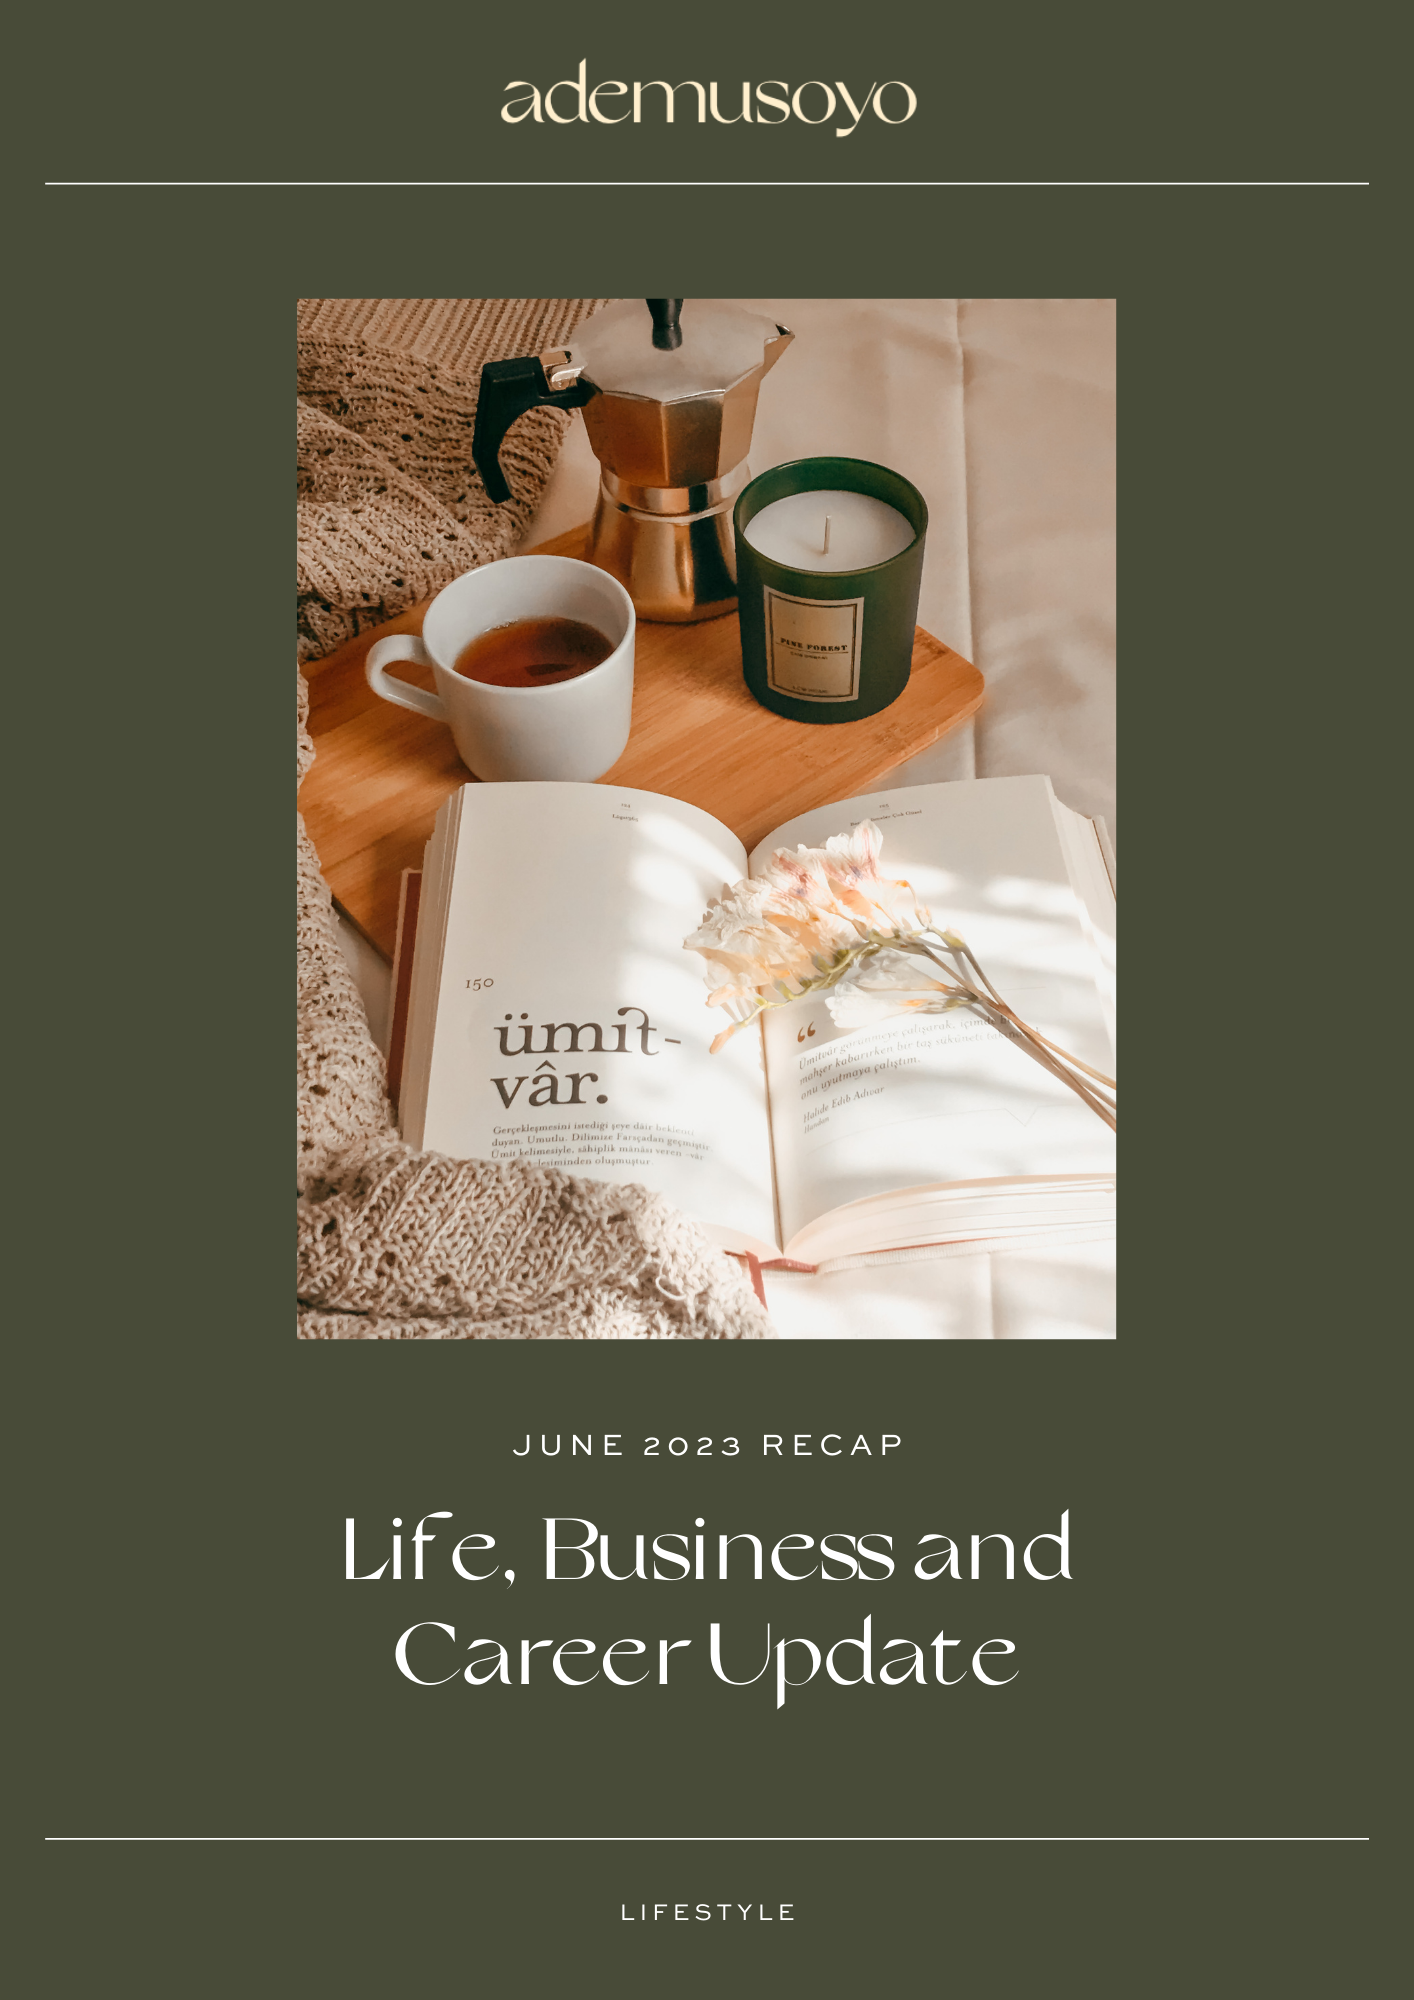 an opened book with a Turkish text that reads "umit-var" on the right while a white flower lays on top of the other side of the page with cup of tea and a candle in green bottle. A text overlay at the bottom that says June 2023 recap: life, business & career update